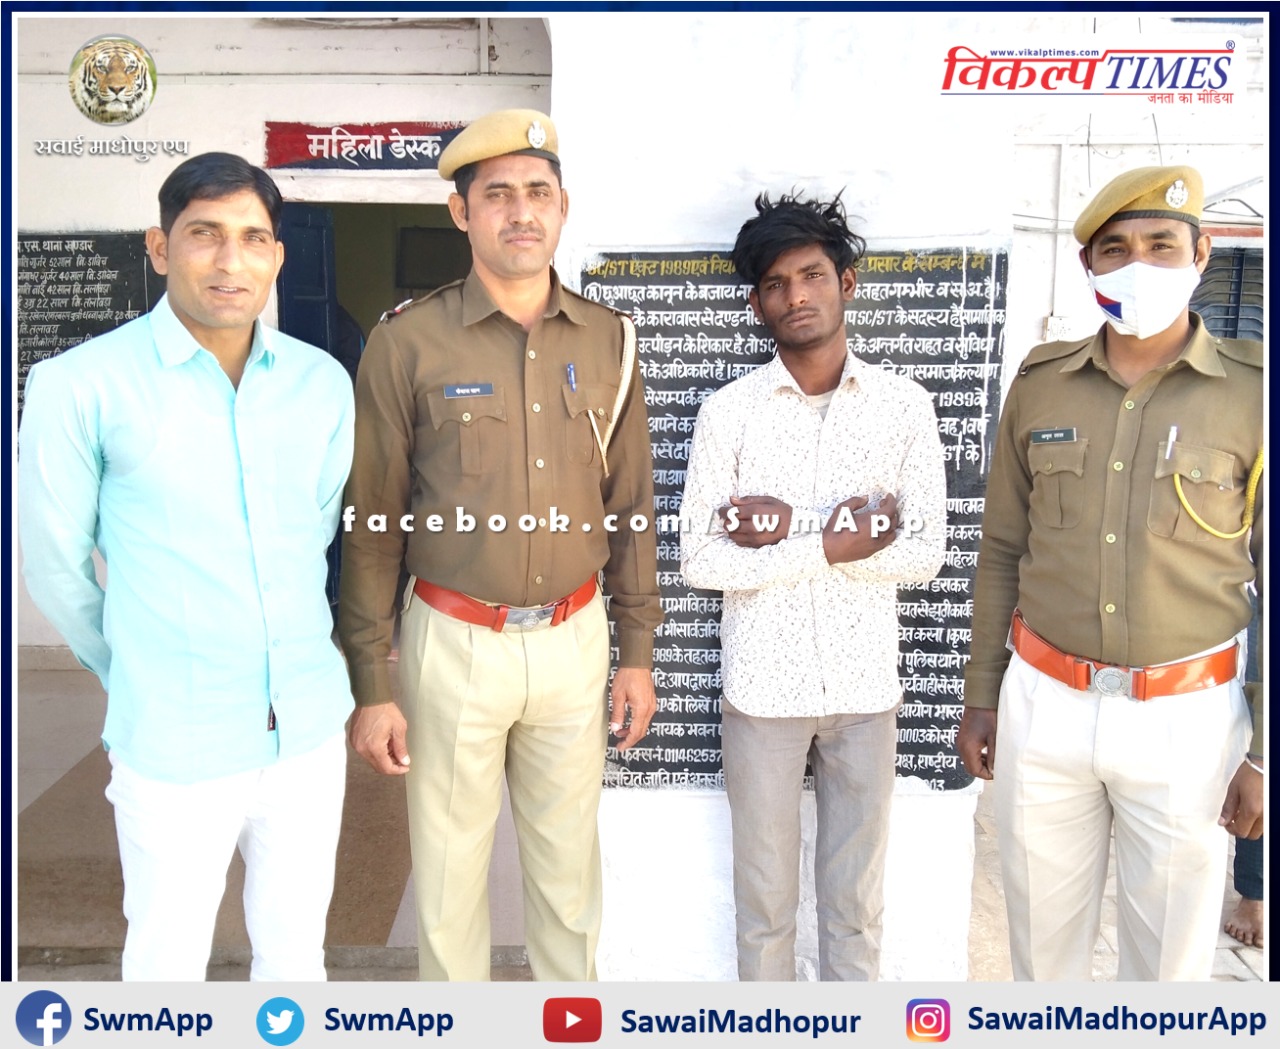 Police arrested accused of daylight robbery in just 24 hours in khandar sawai madhopur